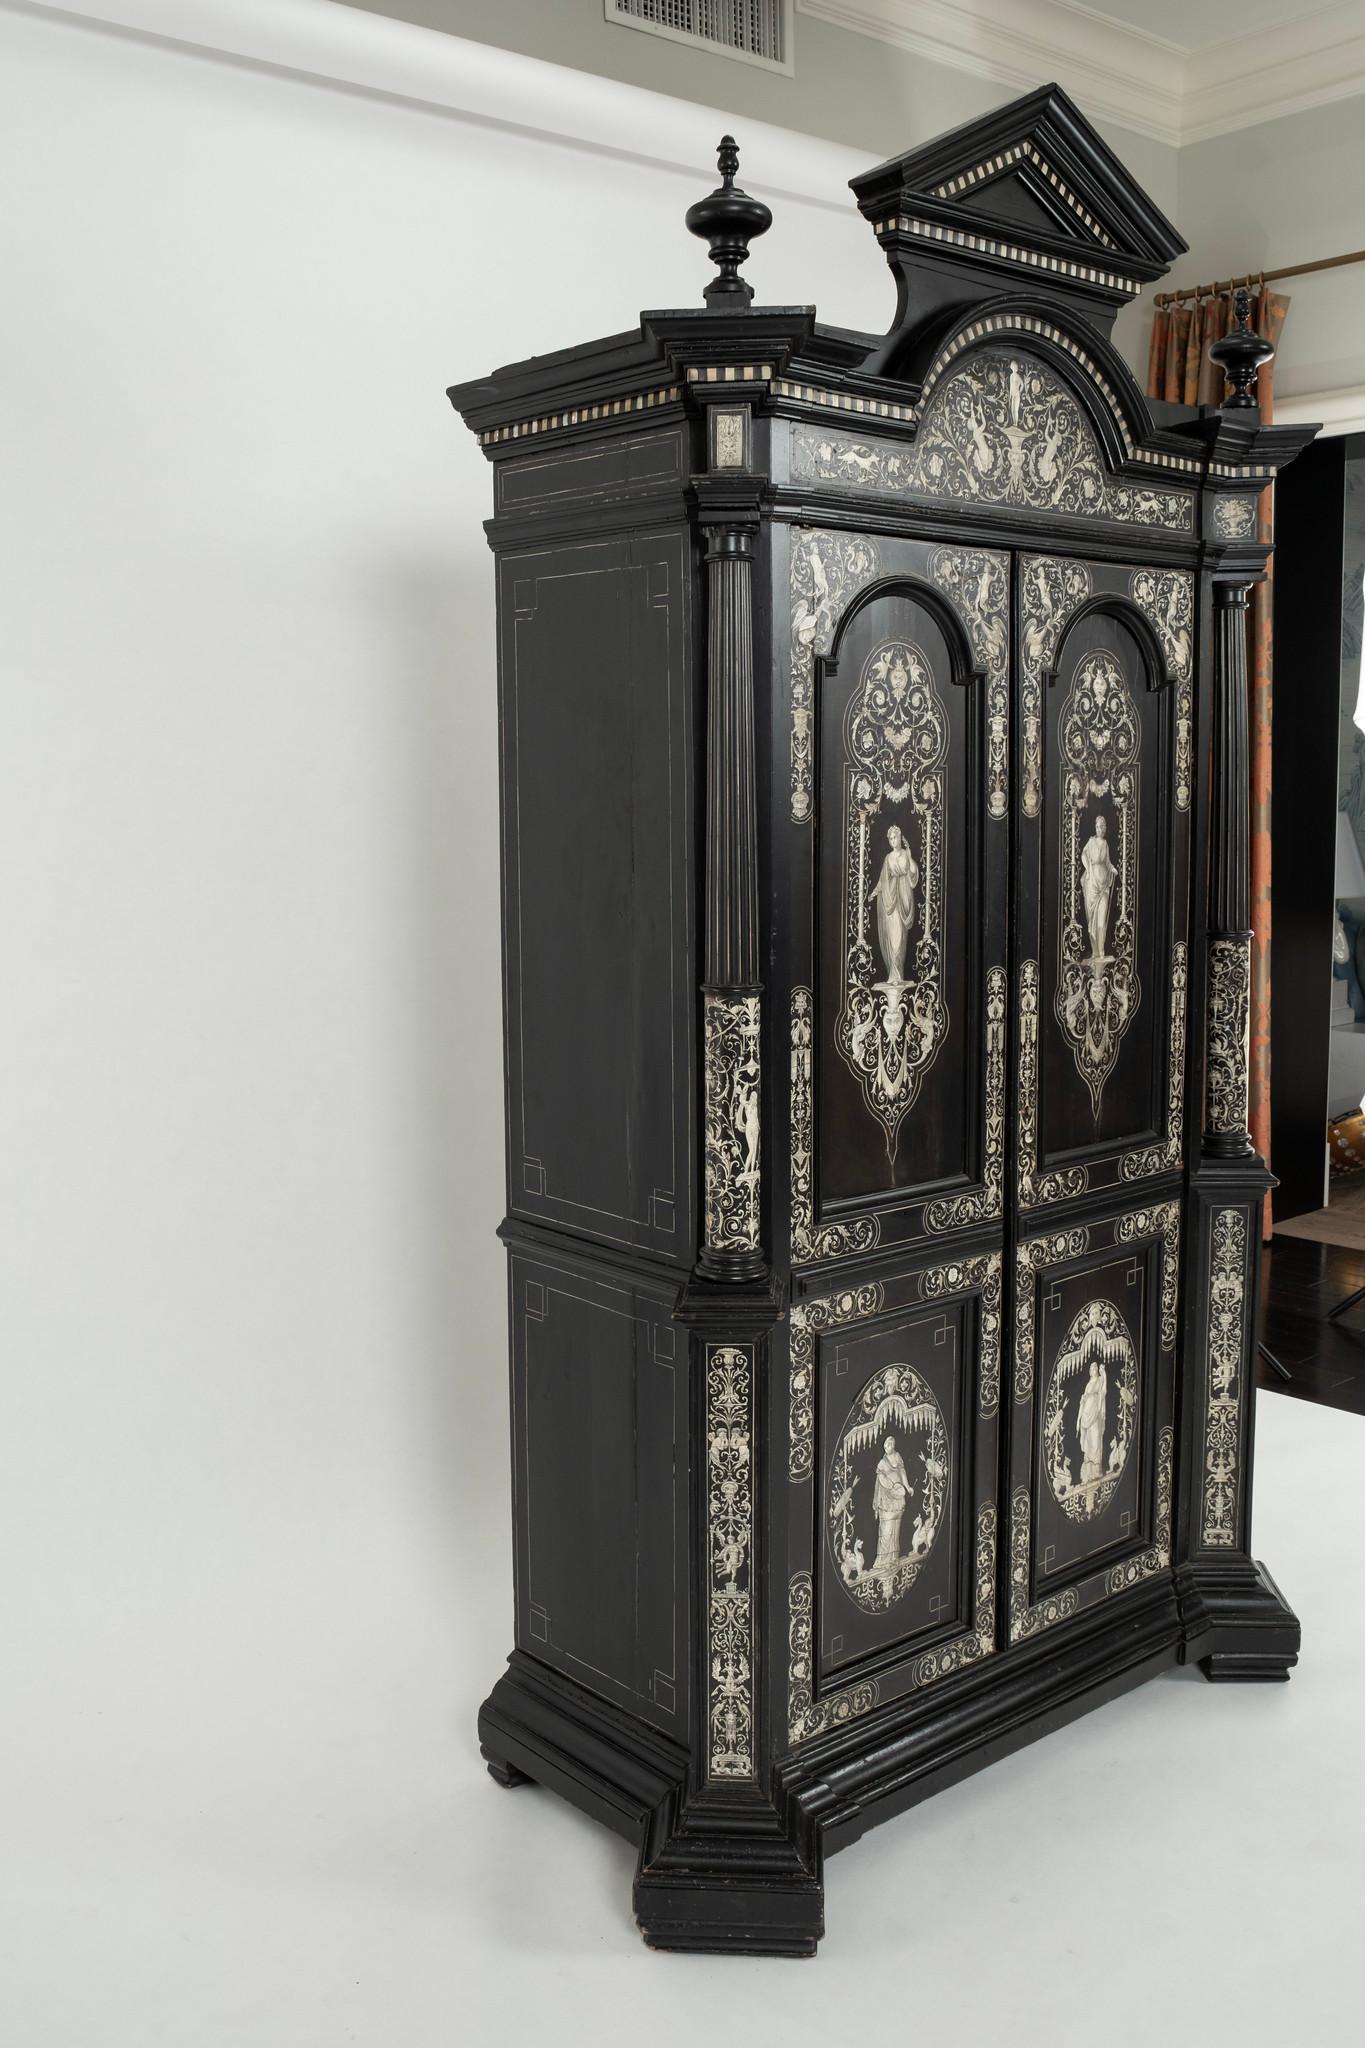 A glorious and magnificent 18th Century Italian collectors cabinet architecturally styled with pediment, columns and finials. This extremely fine cabinet features Florentine inlay detail decorated overall with the 